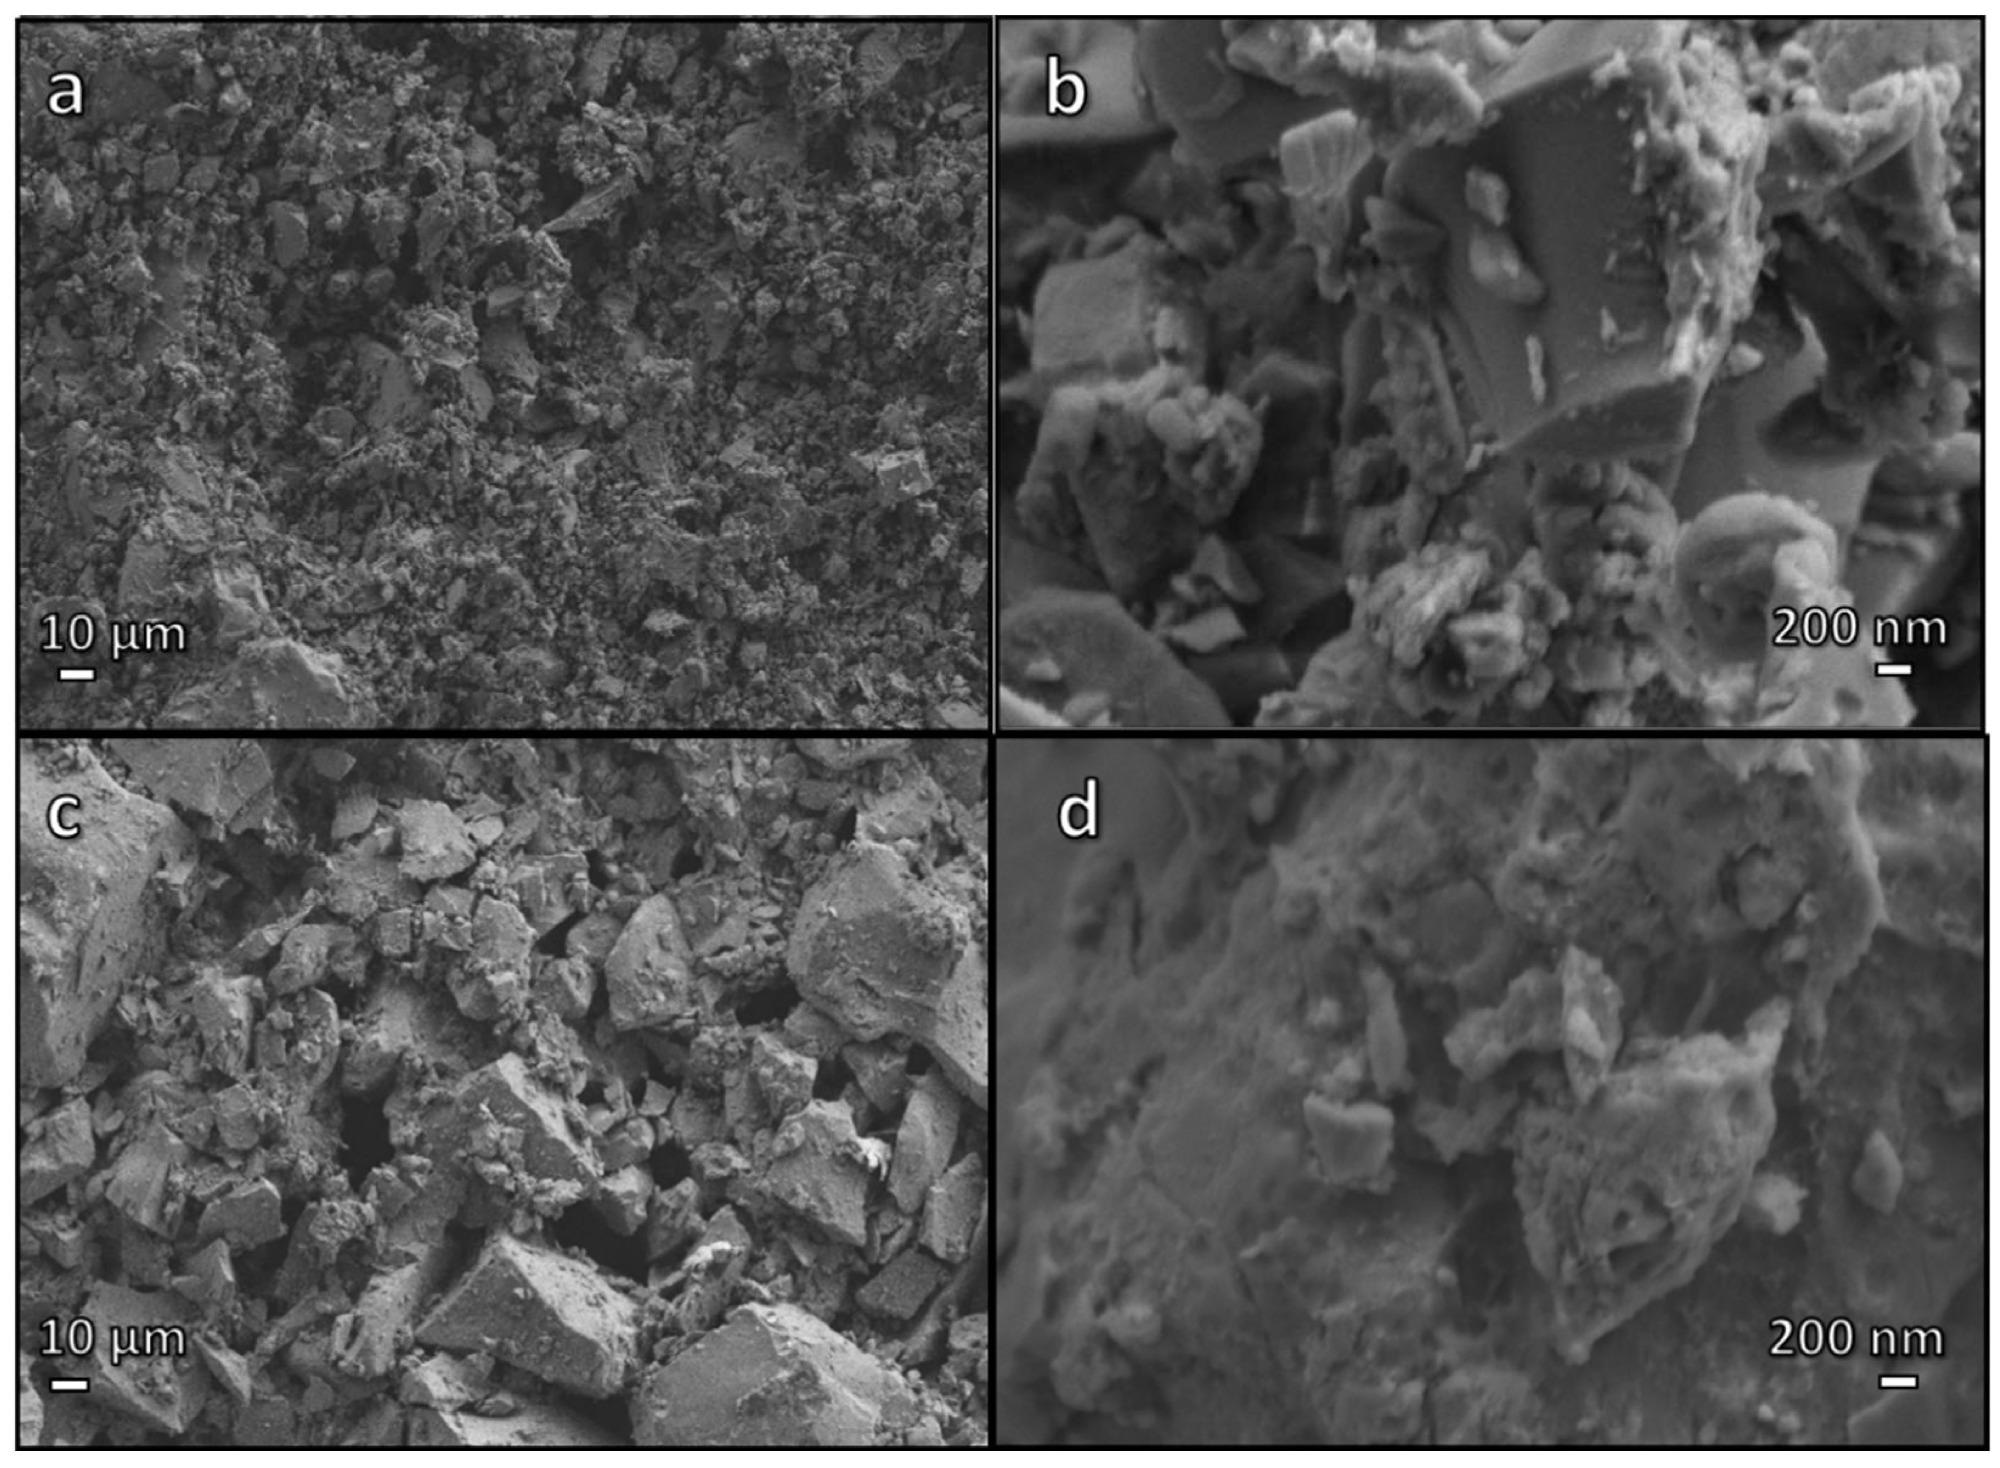 Low and high magnification micrographs of samples after cold consolidation: (a,b) simply hardened suspension; (c,d) after boiling test.